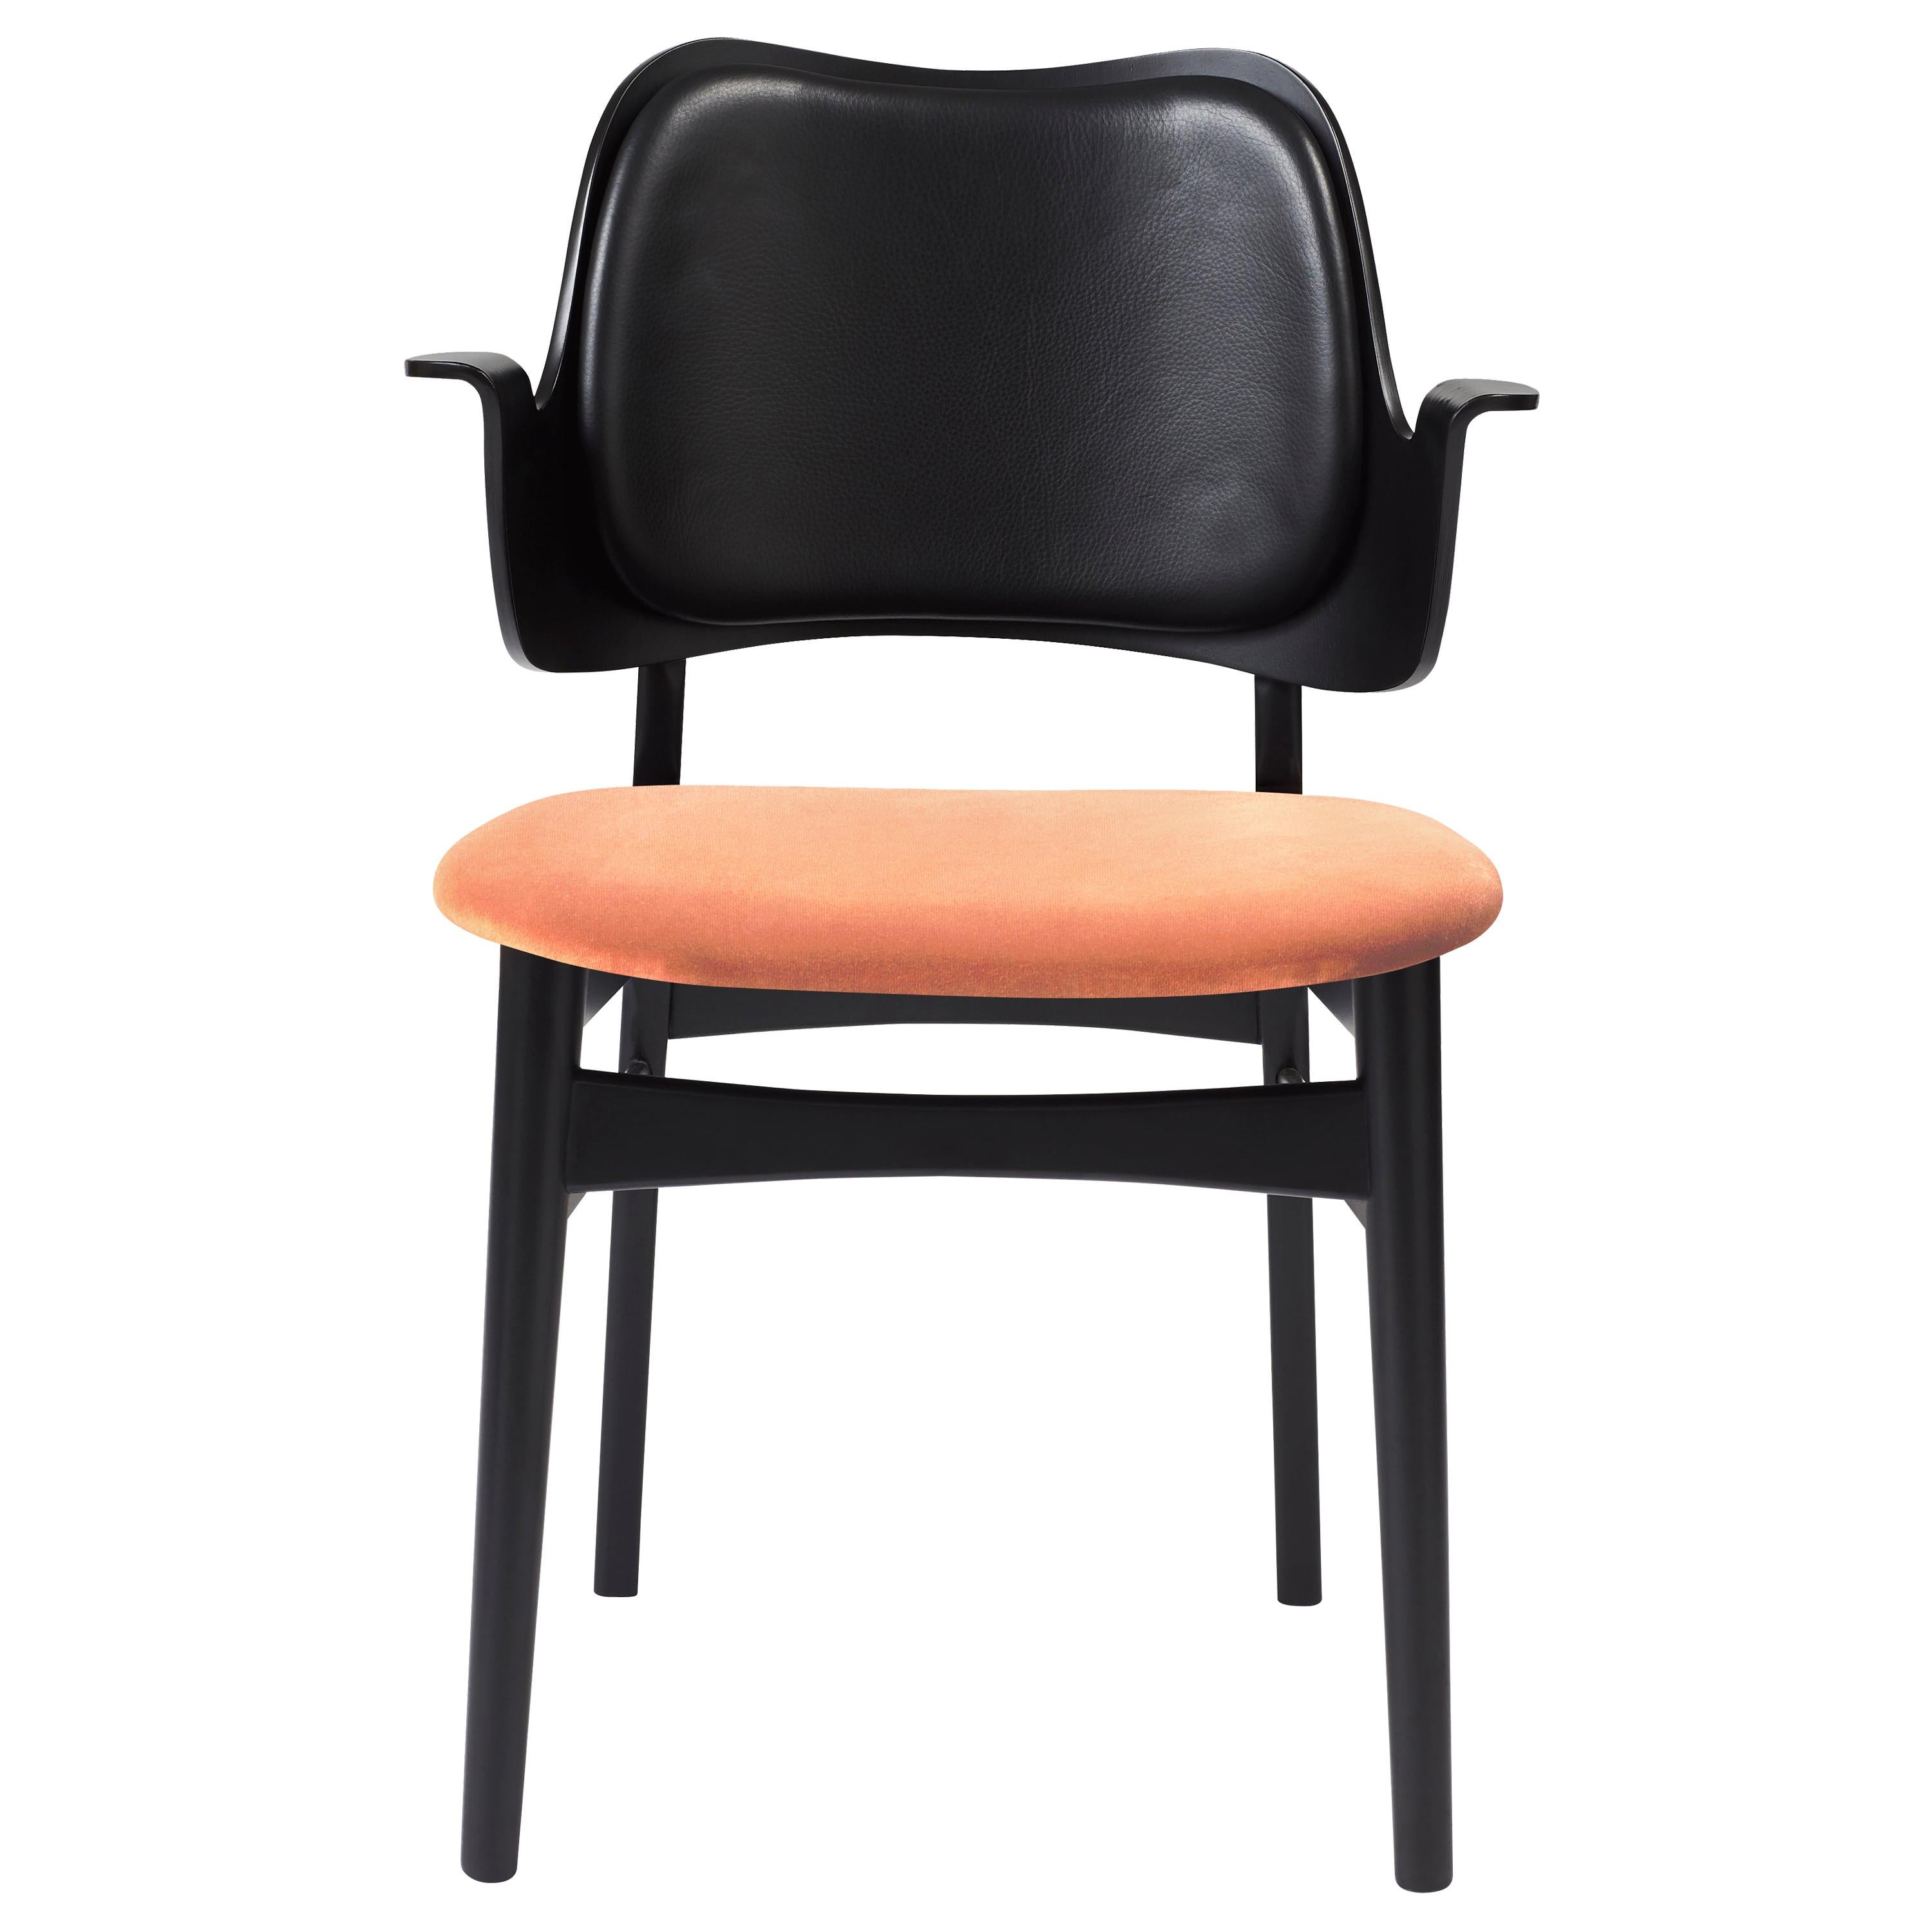 Gesture Two-Tone Fully Upholstered Chair in Black, by Hans Olsen for Warm Nordic